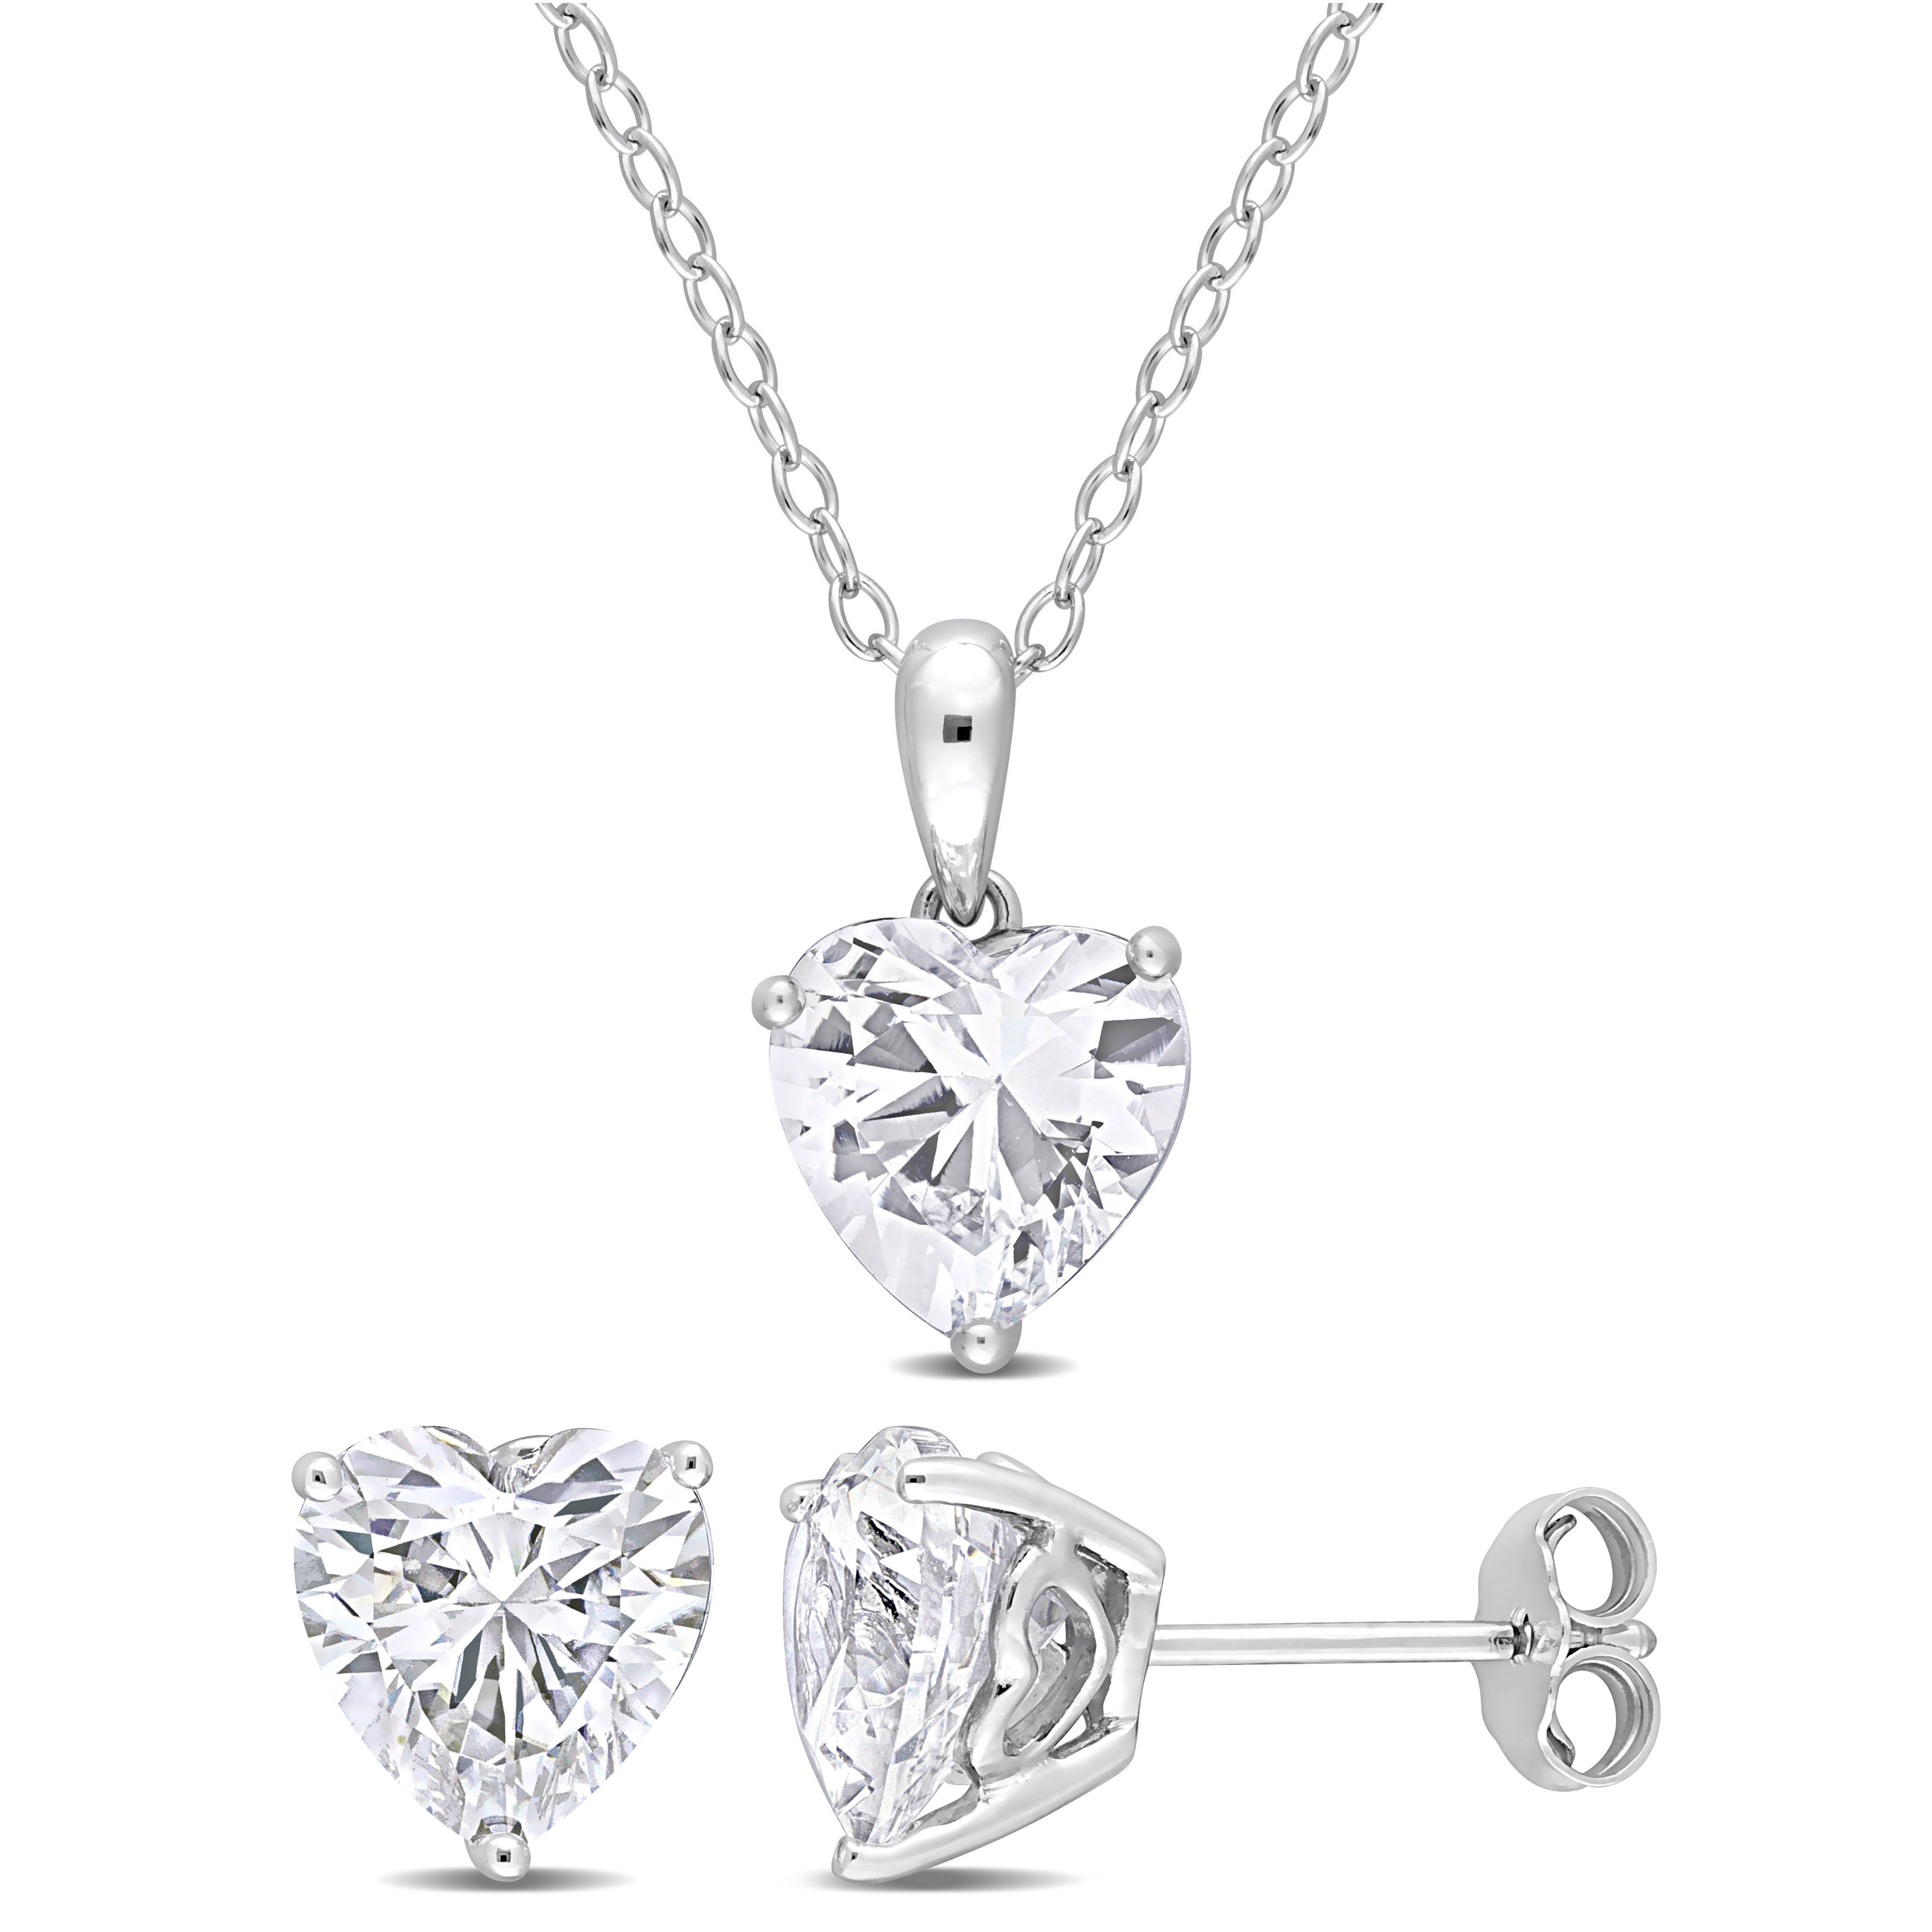 6 3/4 CT TGW Heart-Shape Created White Sapphire 2-Piece Set of Pendant with Chain and Earrings in Sterling Silver